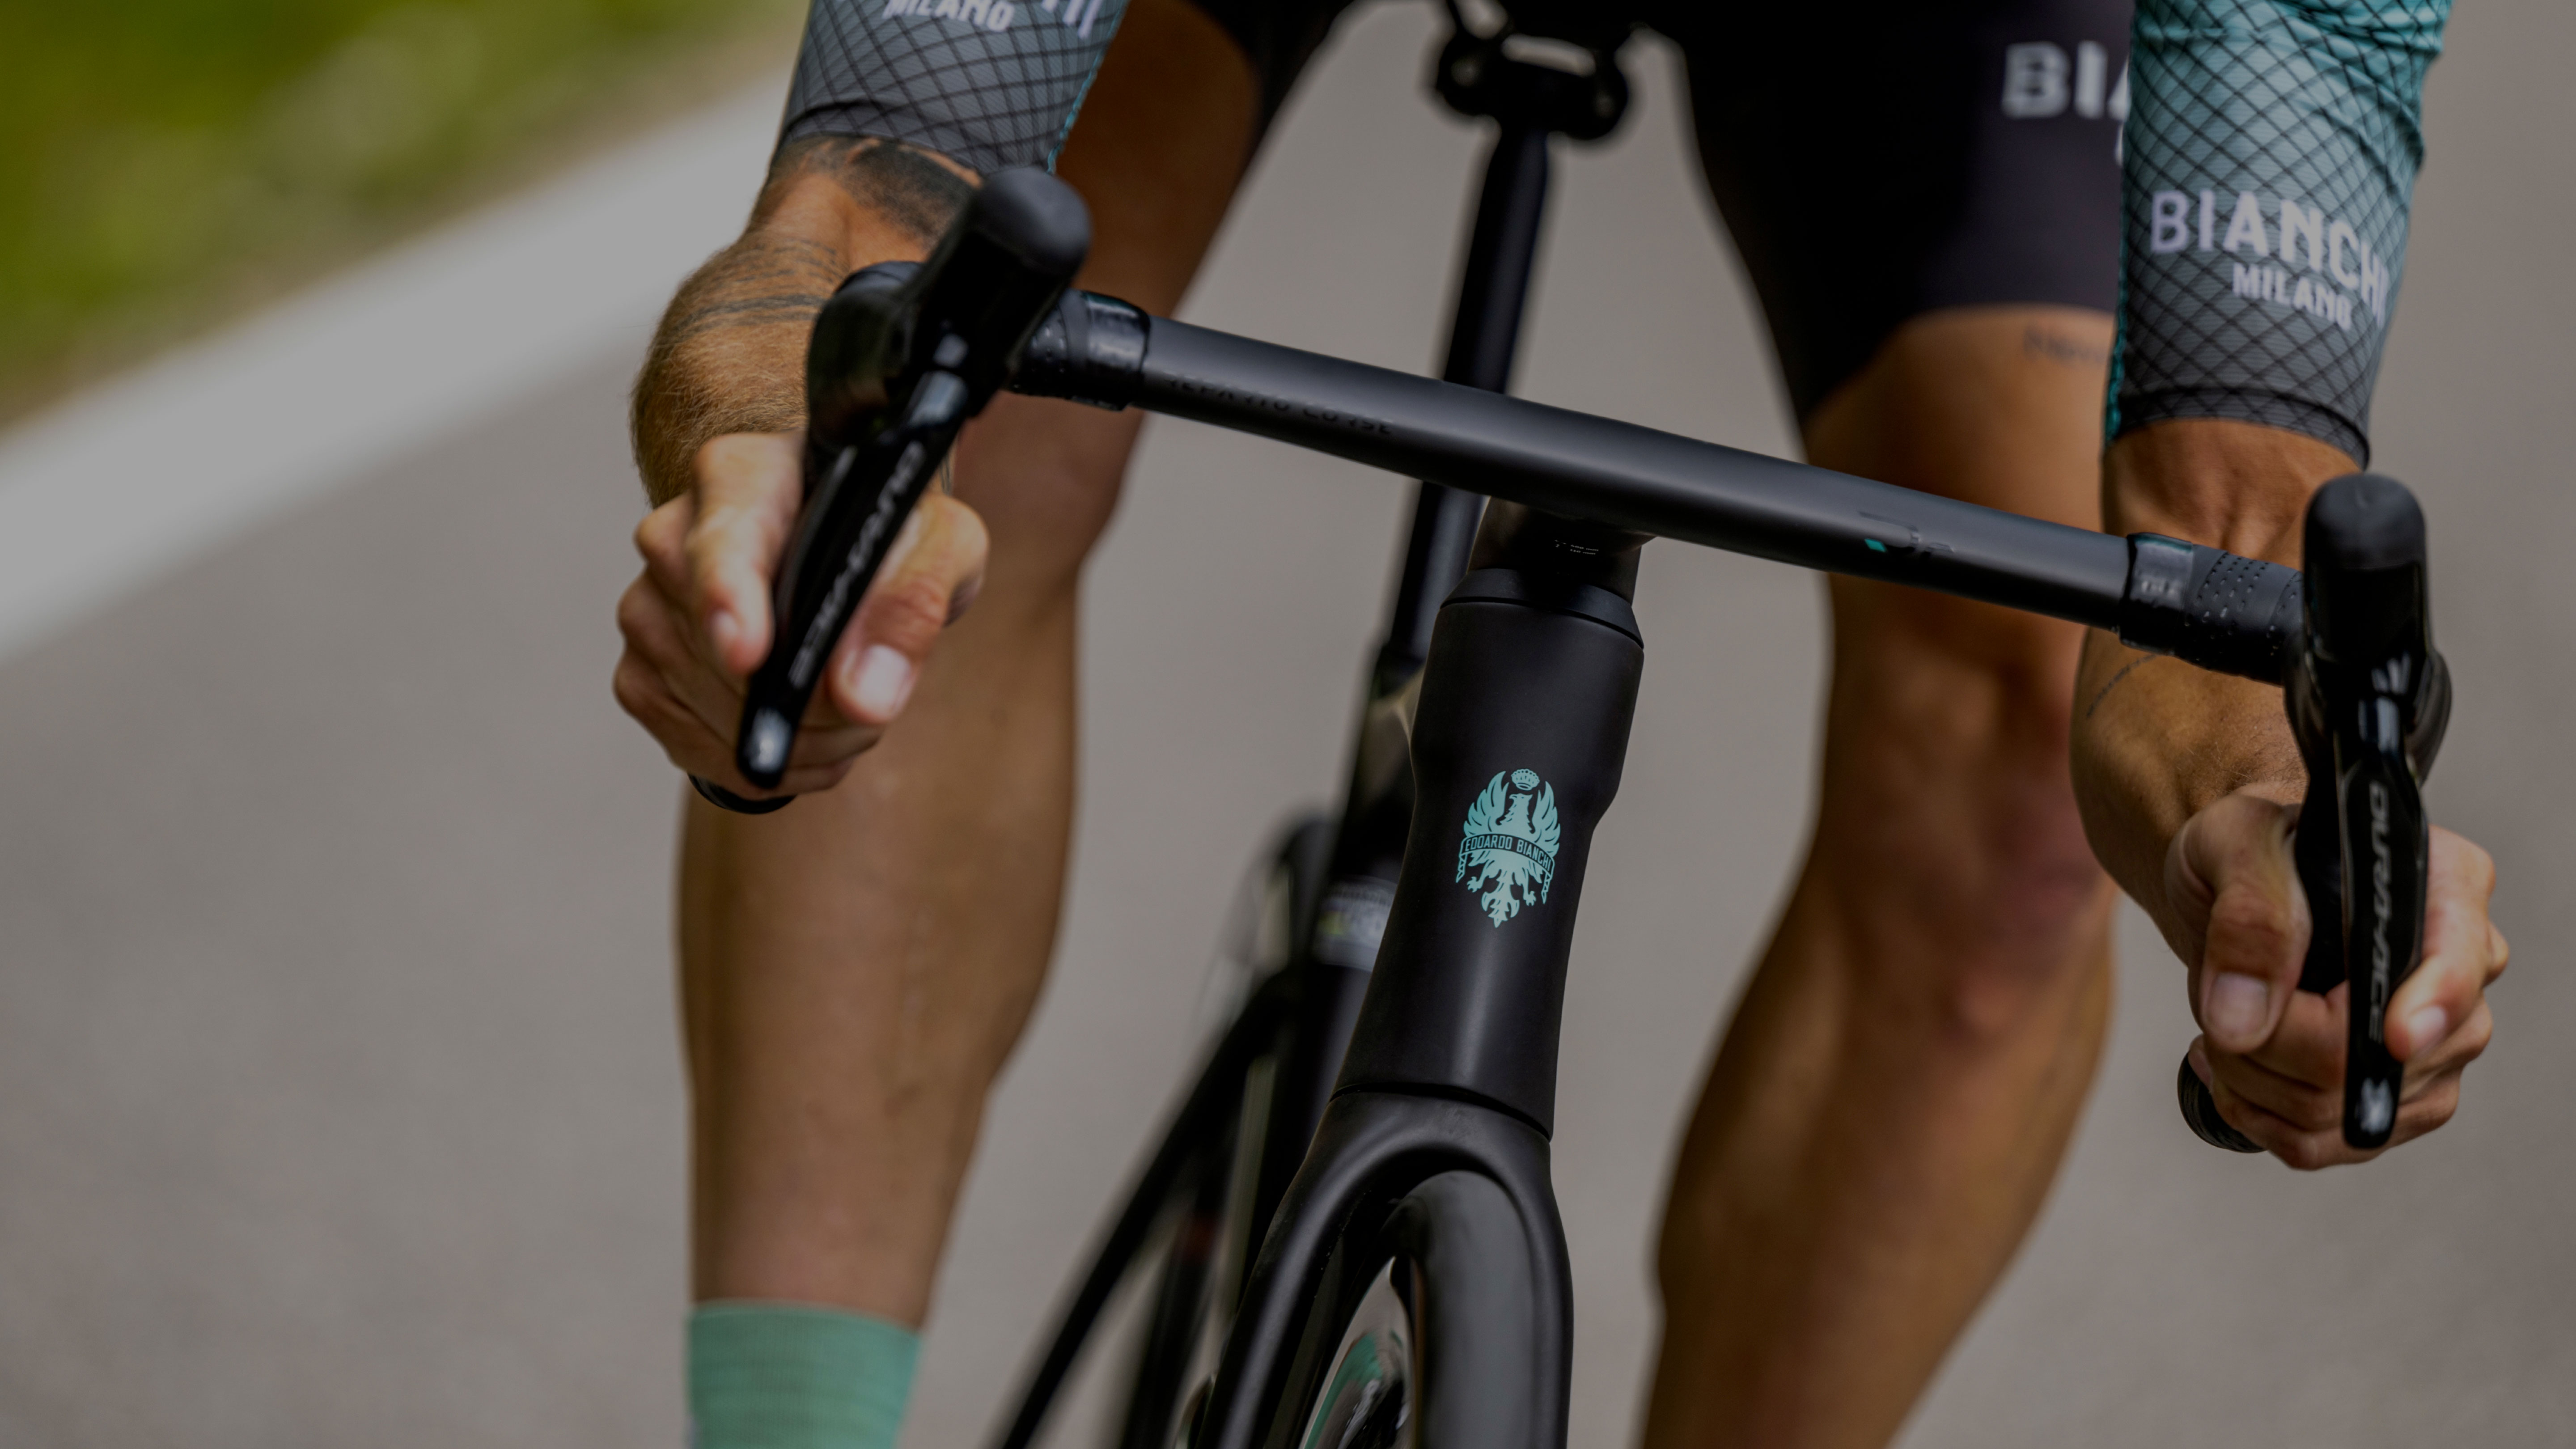 Bianchi | Performance bicycles since 1885